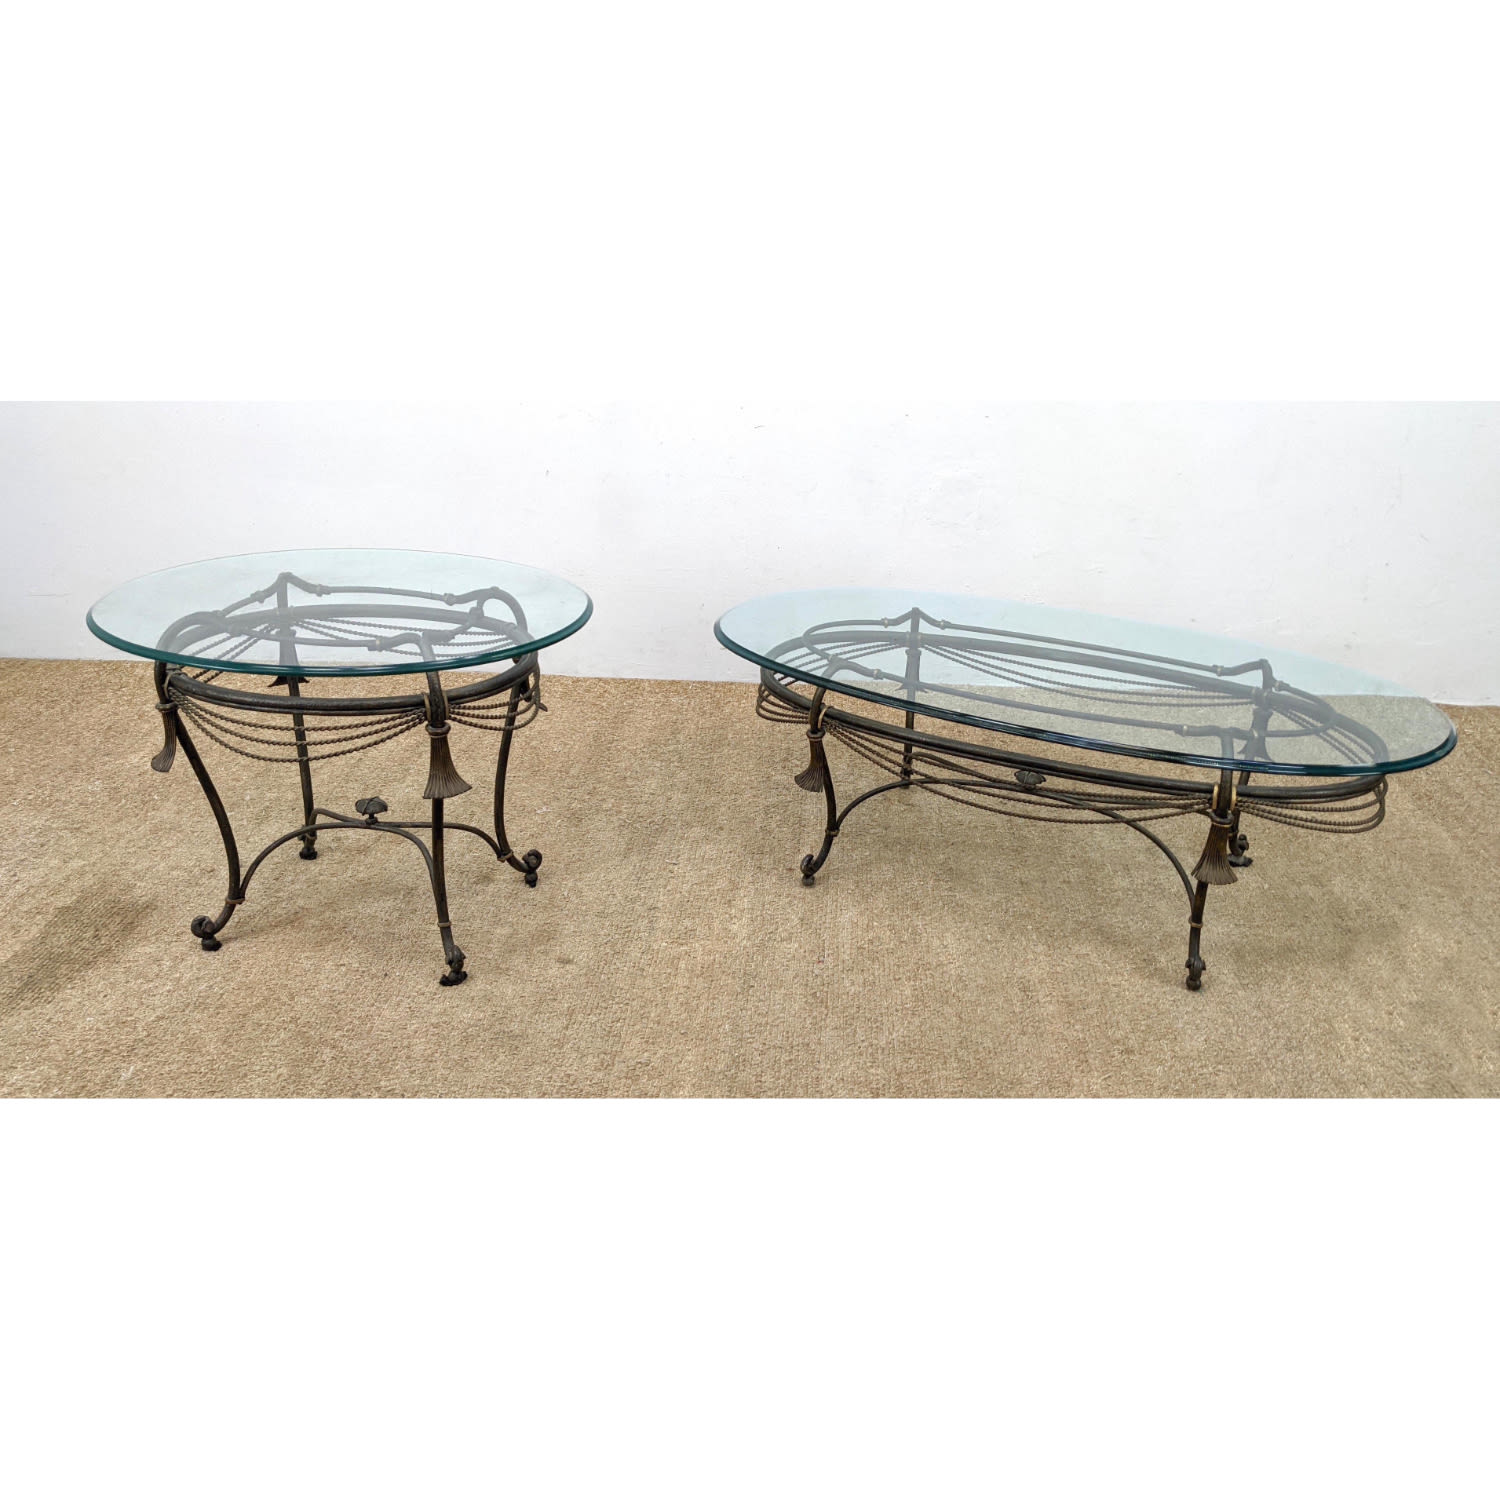 2pc Decorator Tables. Rope and